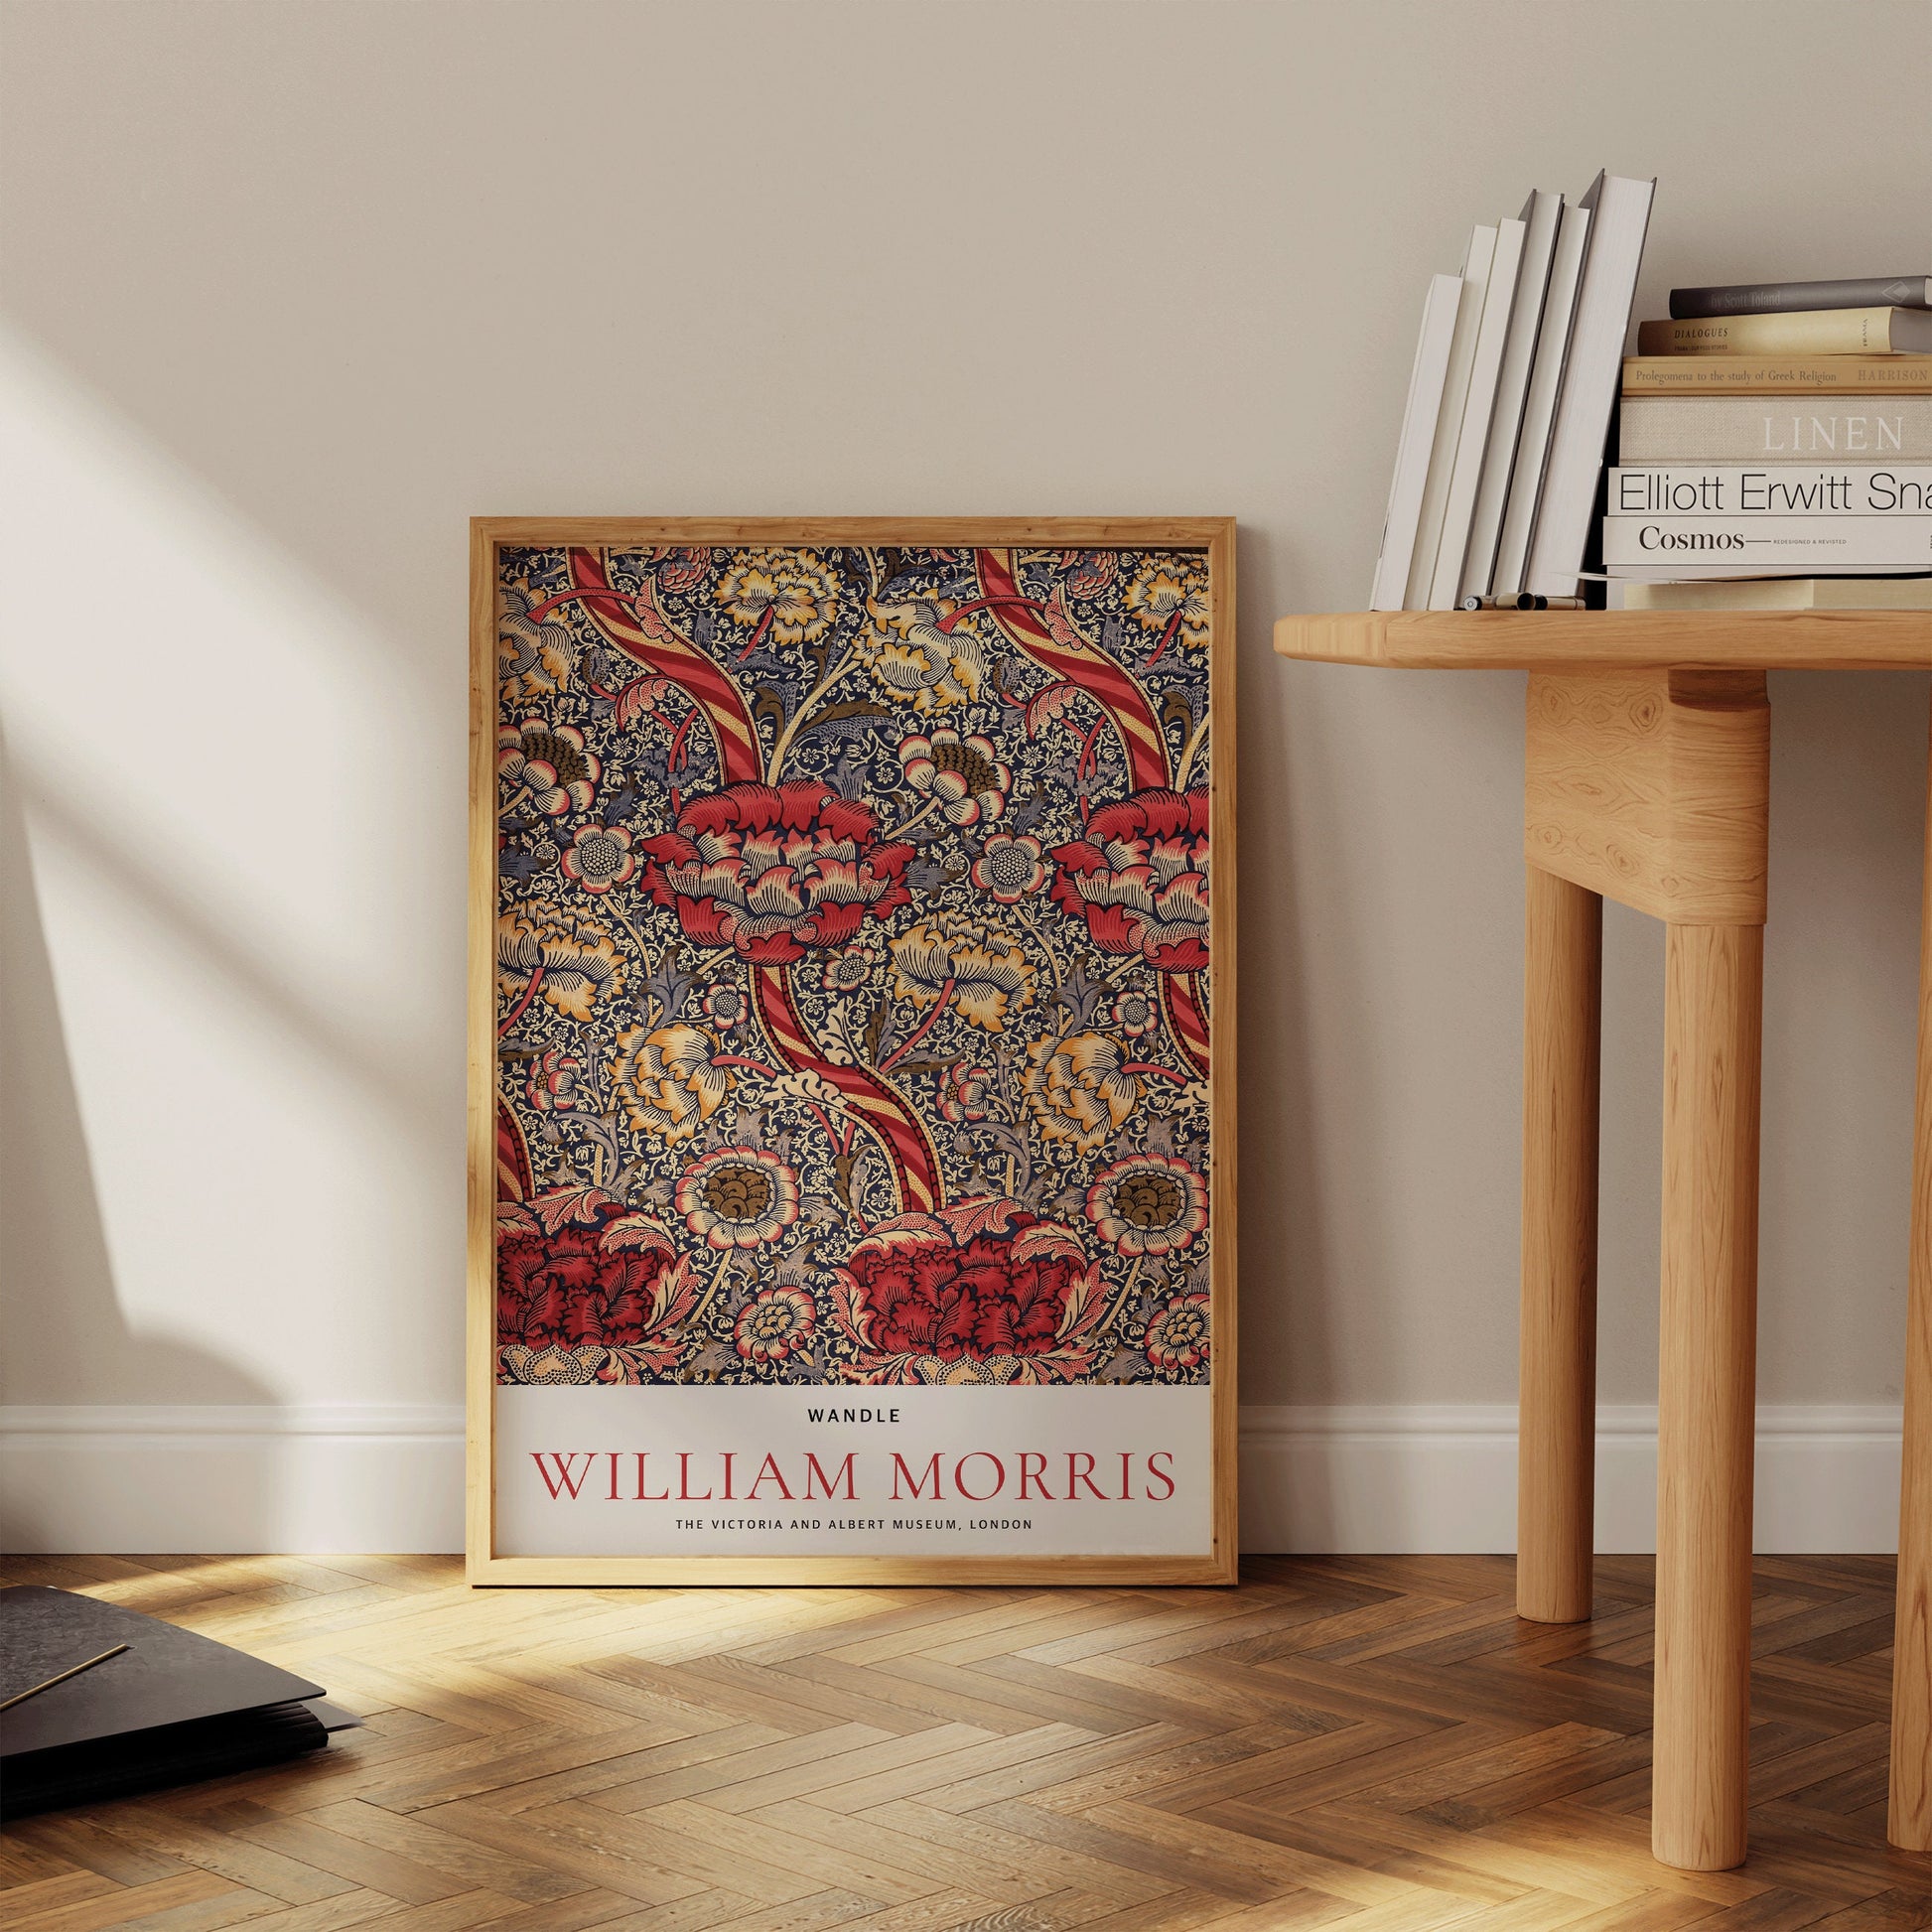 Framed William Morris TULIP AND WILLOW Poster Exhibition Art Print Nouveau Flower Pattern Market Pattern Museum Print Ready to hang artwork